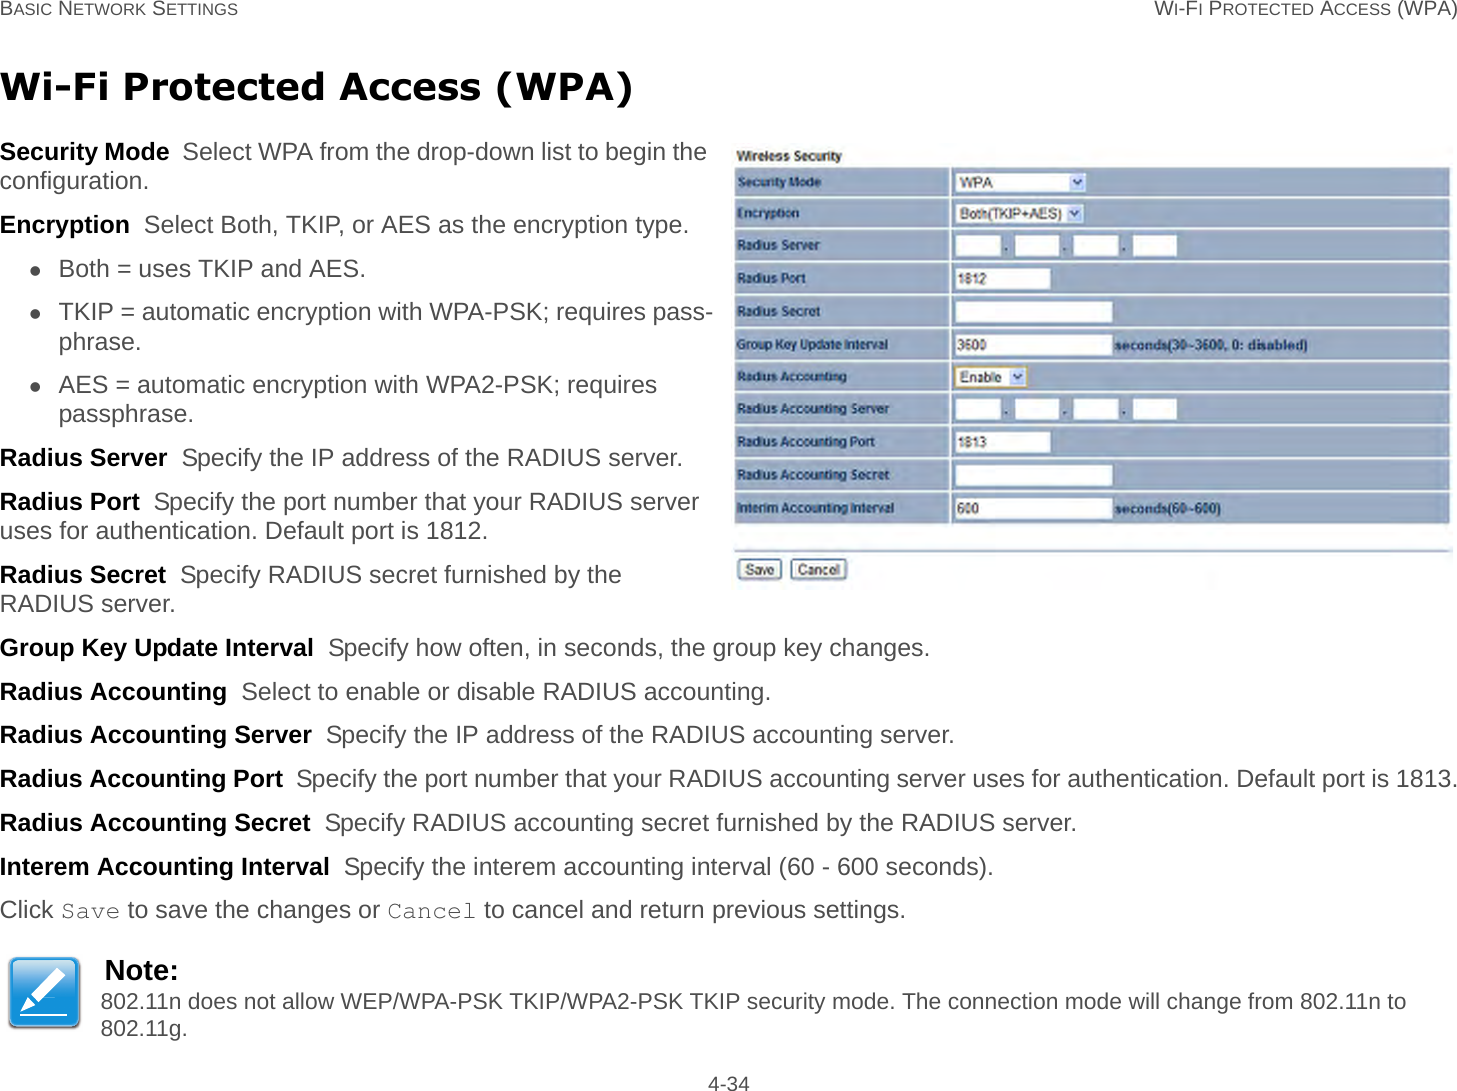 BASIC NETWORK SETTINGS WI-FI PROTECTED ACCESS (WPA) 4-34Wi-Fi Protected Access (WPA)Security Mode  Select WPA from the drop-down list to begin the configuration.Encryption  Select Both, TKIP, or AES as the encryption type.Both = uses TKIP and AES.TKIP = automatic encryption with WPA-PSK; requires pass-phrase.AES = automatic encryption with WPA2-PSK; requires passphrase.Radius Server  Specify the IP address of the RADIUS server.Radius Port  Specify the port number that your RADIUS server uses for authentication. Default port is 1812.Radius Secret  Specify RADIUS secret furnished by the RADIUS server.Group Key Update Interval  Specify how often, in seconds, the group key changes.Radius Accounting  Select to enable or disable RADIUS accounting.Radius Accounting Server  Specify the IP address of the RADIUS accounting server.Radius Accounting Port  Specify the port number that your RADIUS accounting server uses for authentication. Default port is 1813.Radius Accounting Secret  Specify RADIUS accounting secret furnished by the RADIUS server.Interem Accounting Interval  Specify the interem accounting interval (60 - 600 seconds).Click Save to save the changes or Cancel to cancel and return previous settings.Note:802.11n does not allow WEP/WPA-PSK TKIP/WPA2-PSK TKIP security mode. The connection mode will change from 802.11n to 802.11g.